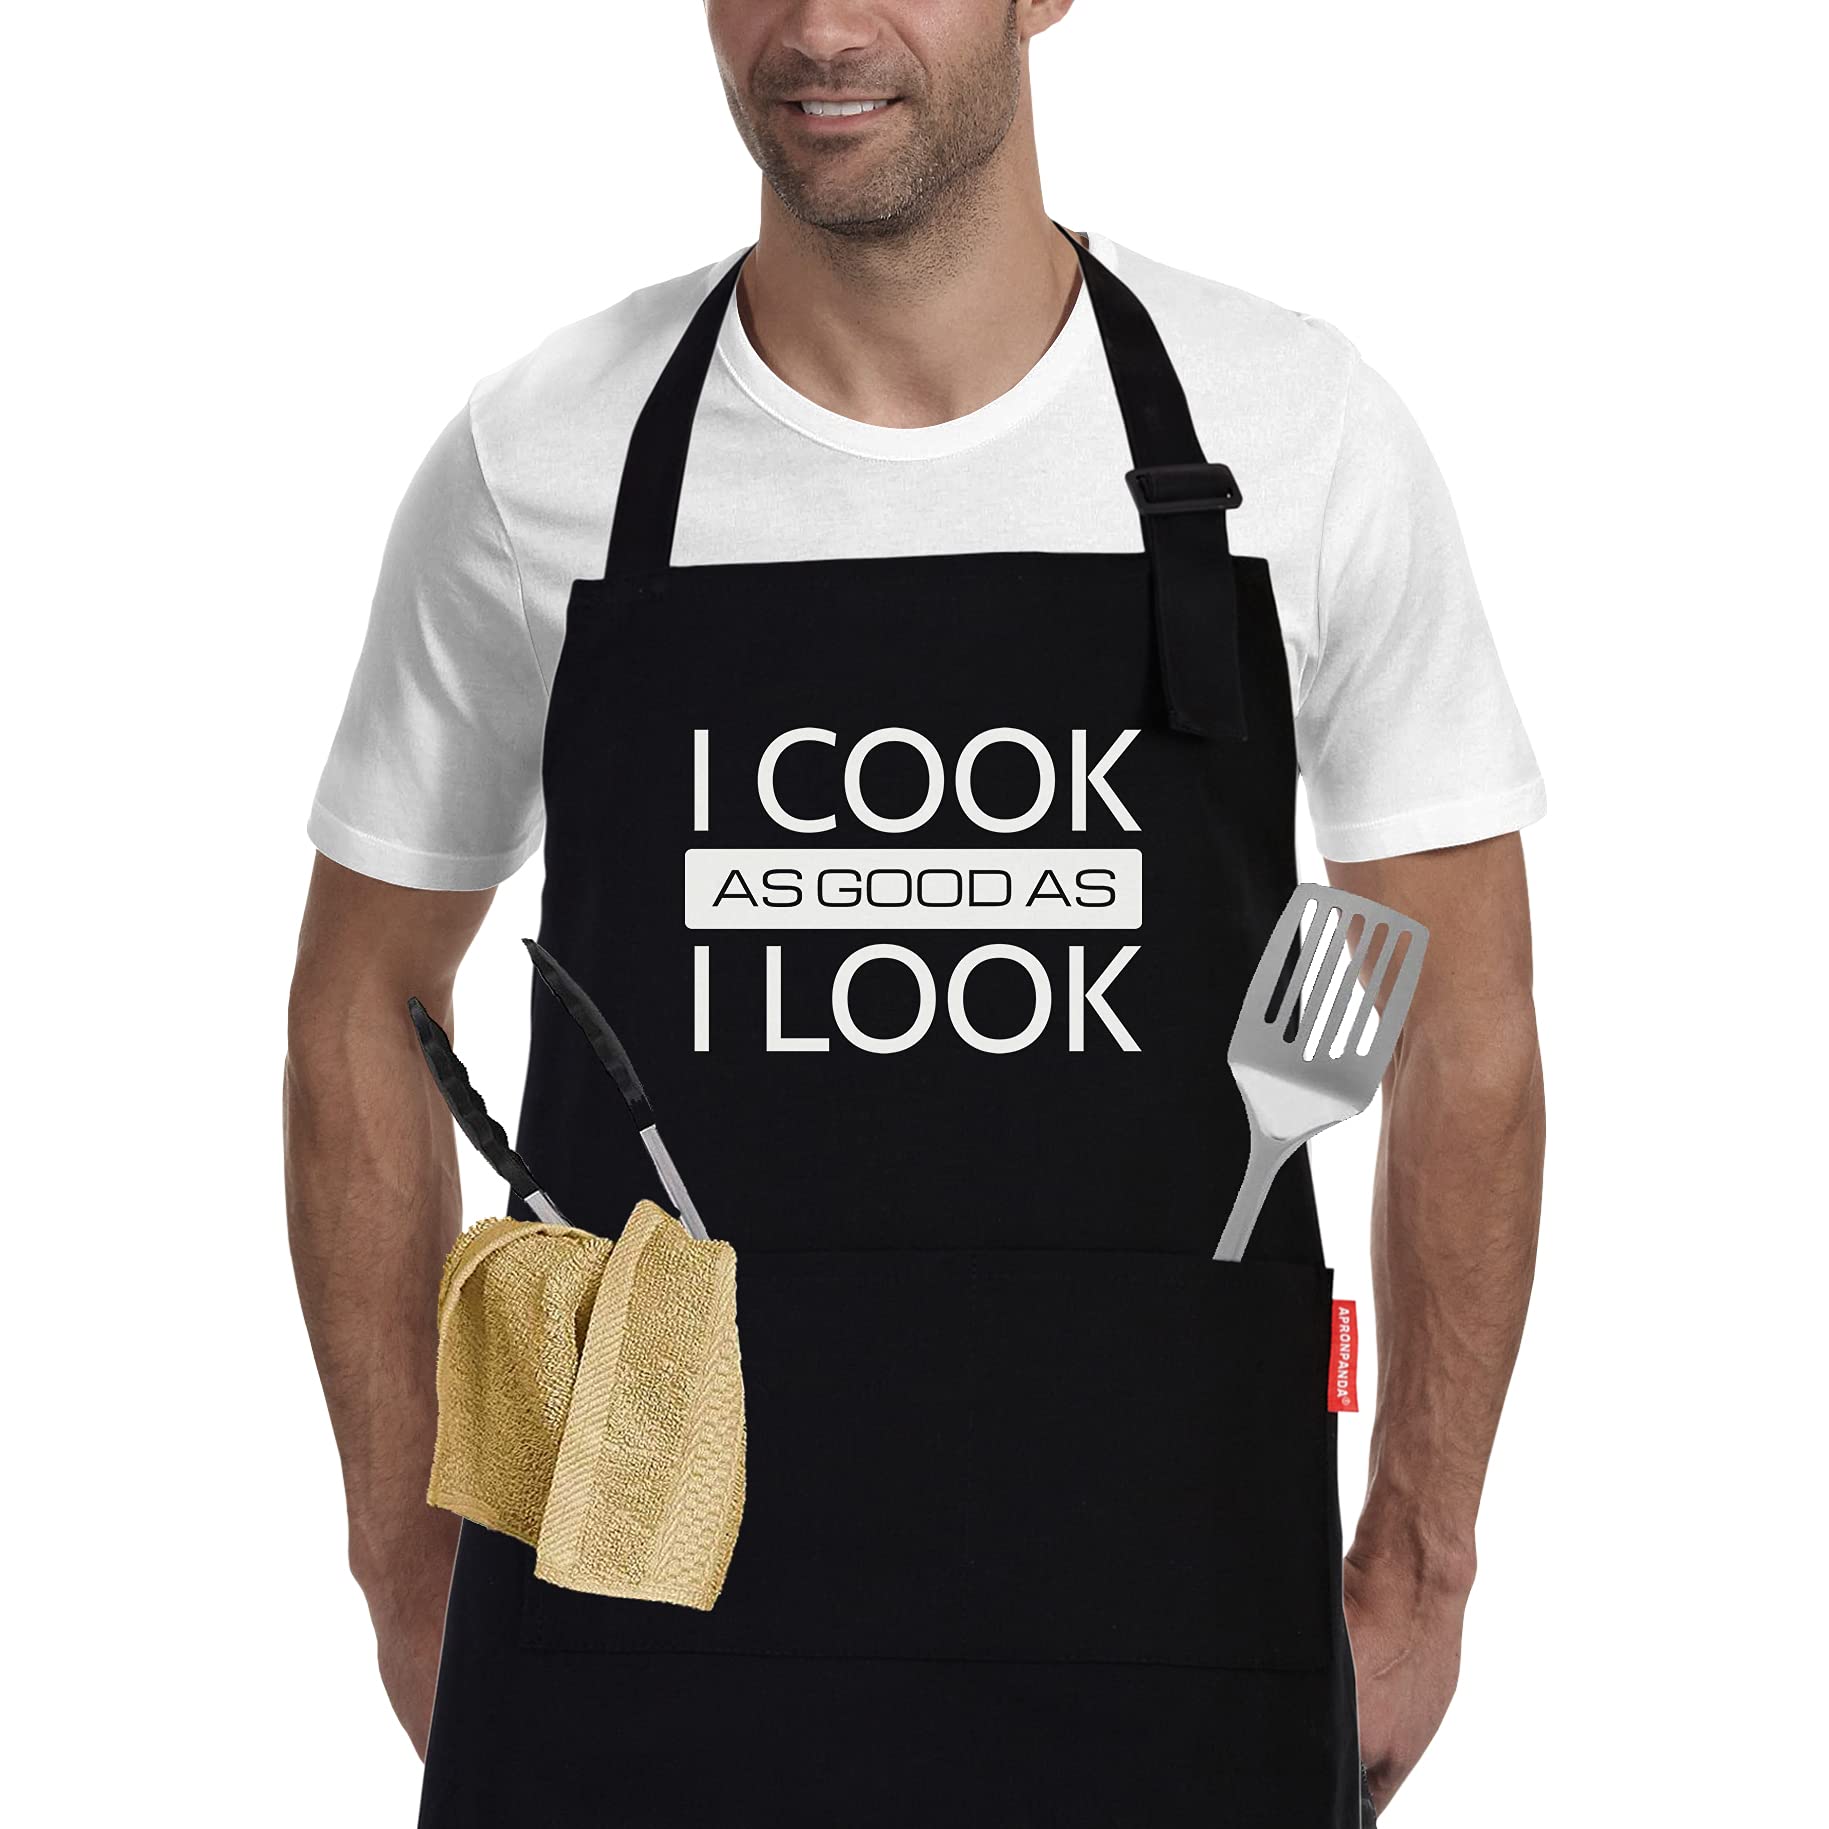 Cotton Aprons for Women Men, Funny Kitchen Cooking Aprons with 2 Pockets - Gifts for Dad Mom Wife Husband Girlfriend and Boyfriend